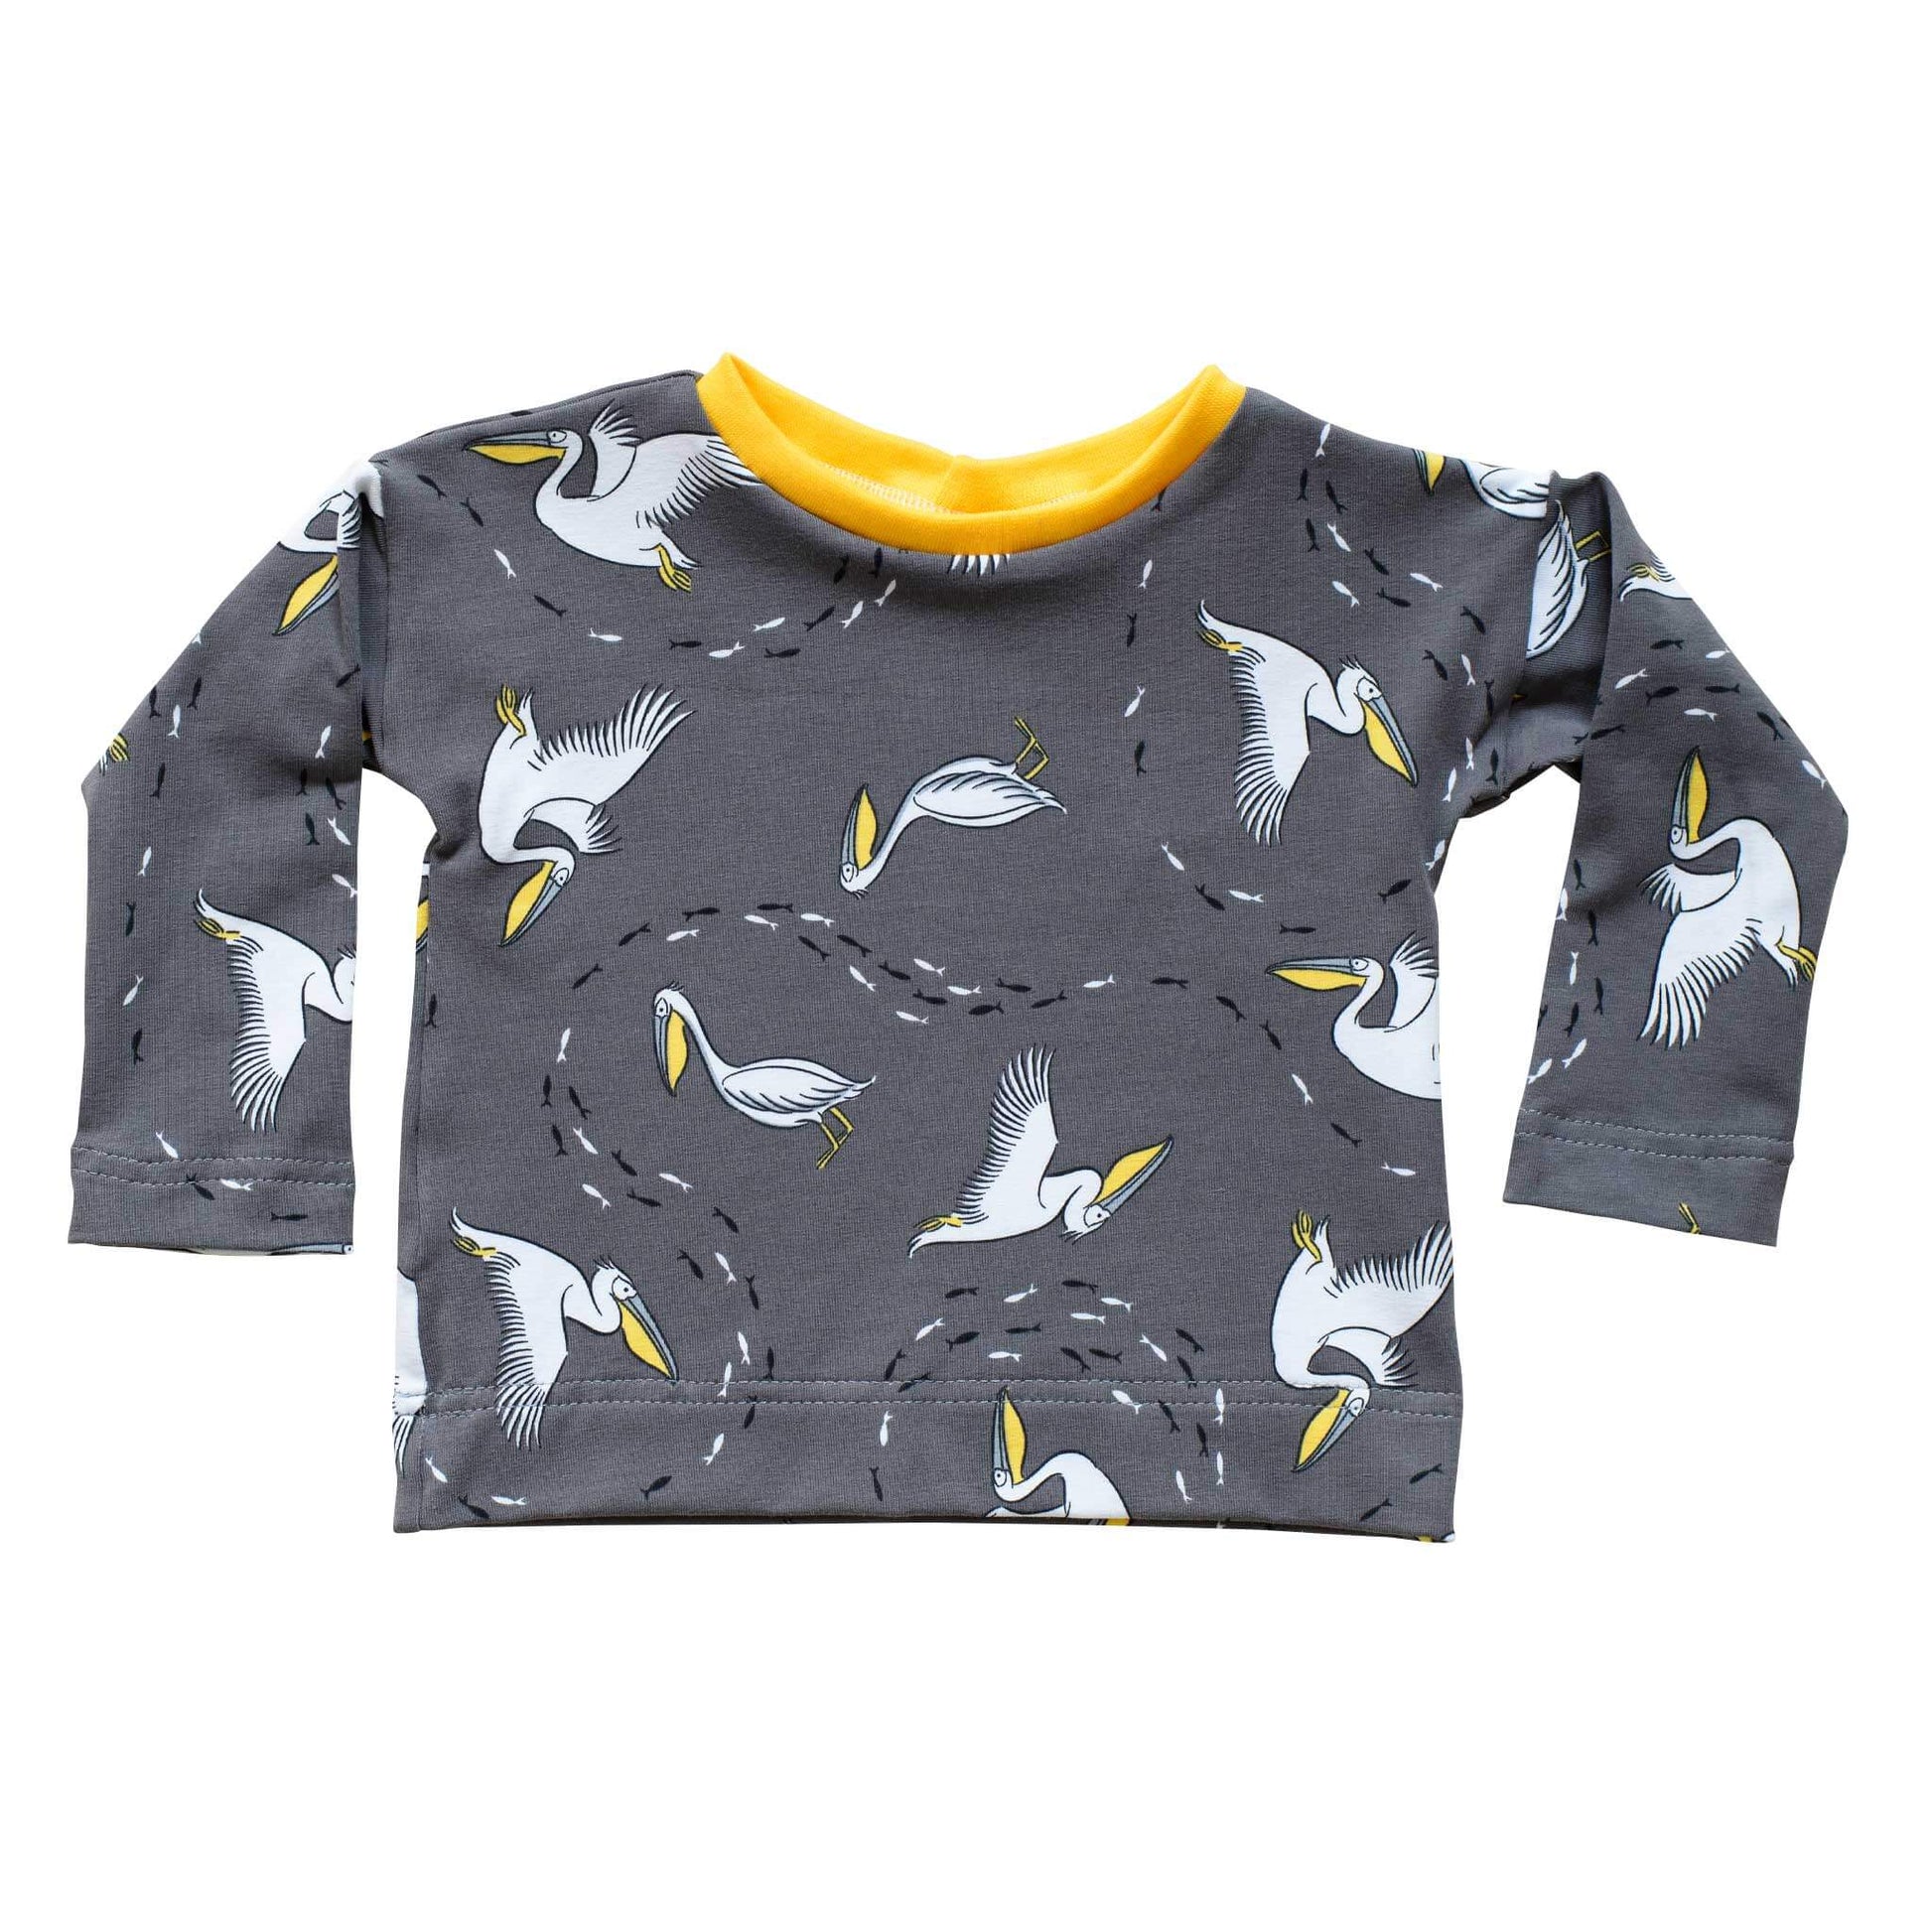 Relaxed long sleeved pelican print tee with contrasting neck band in yellow organic rib.